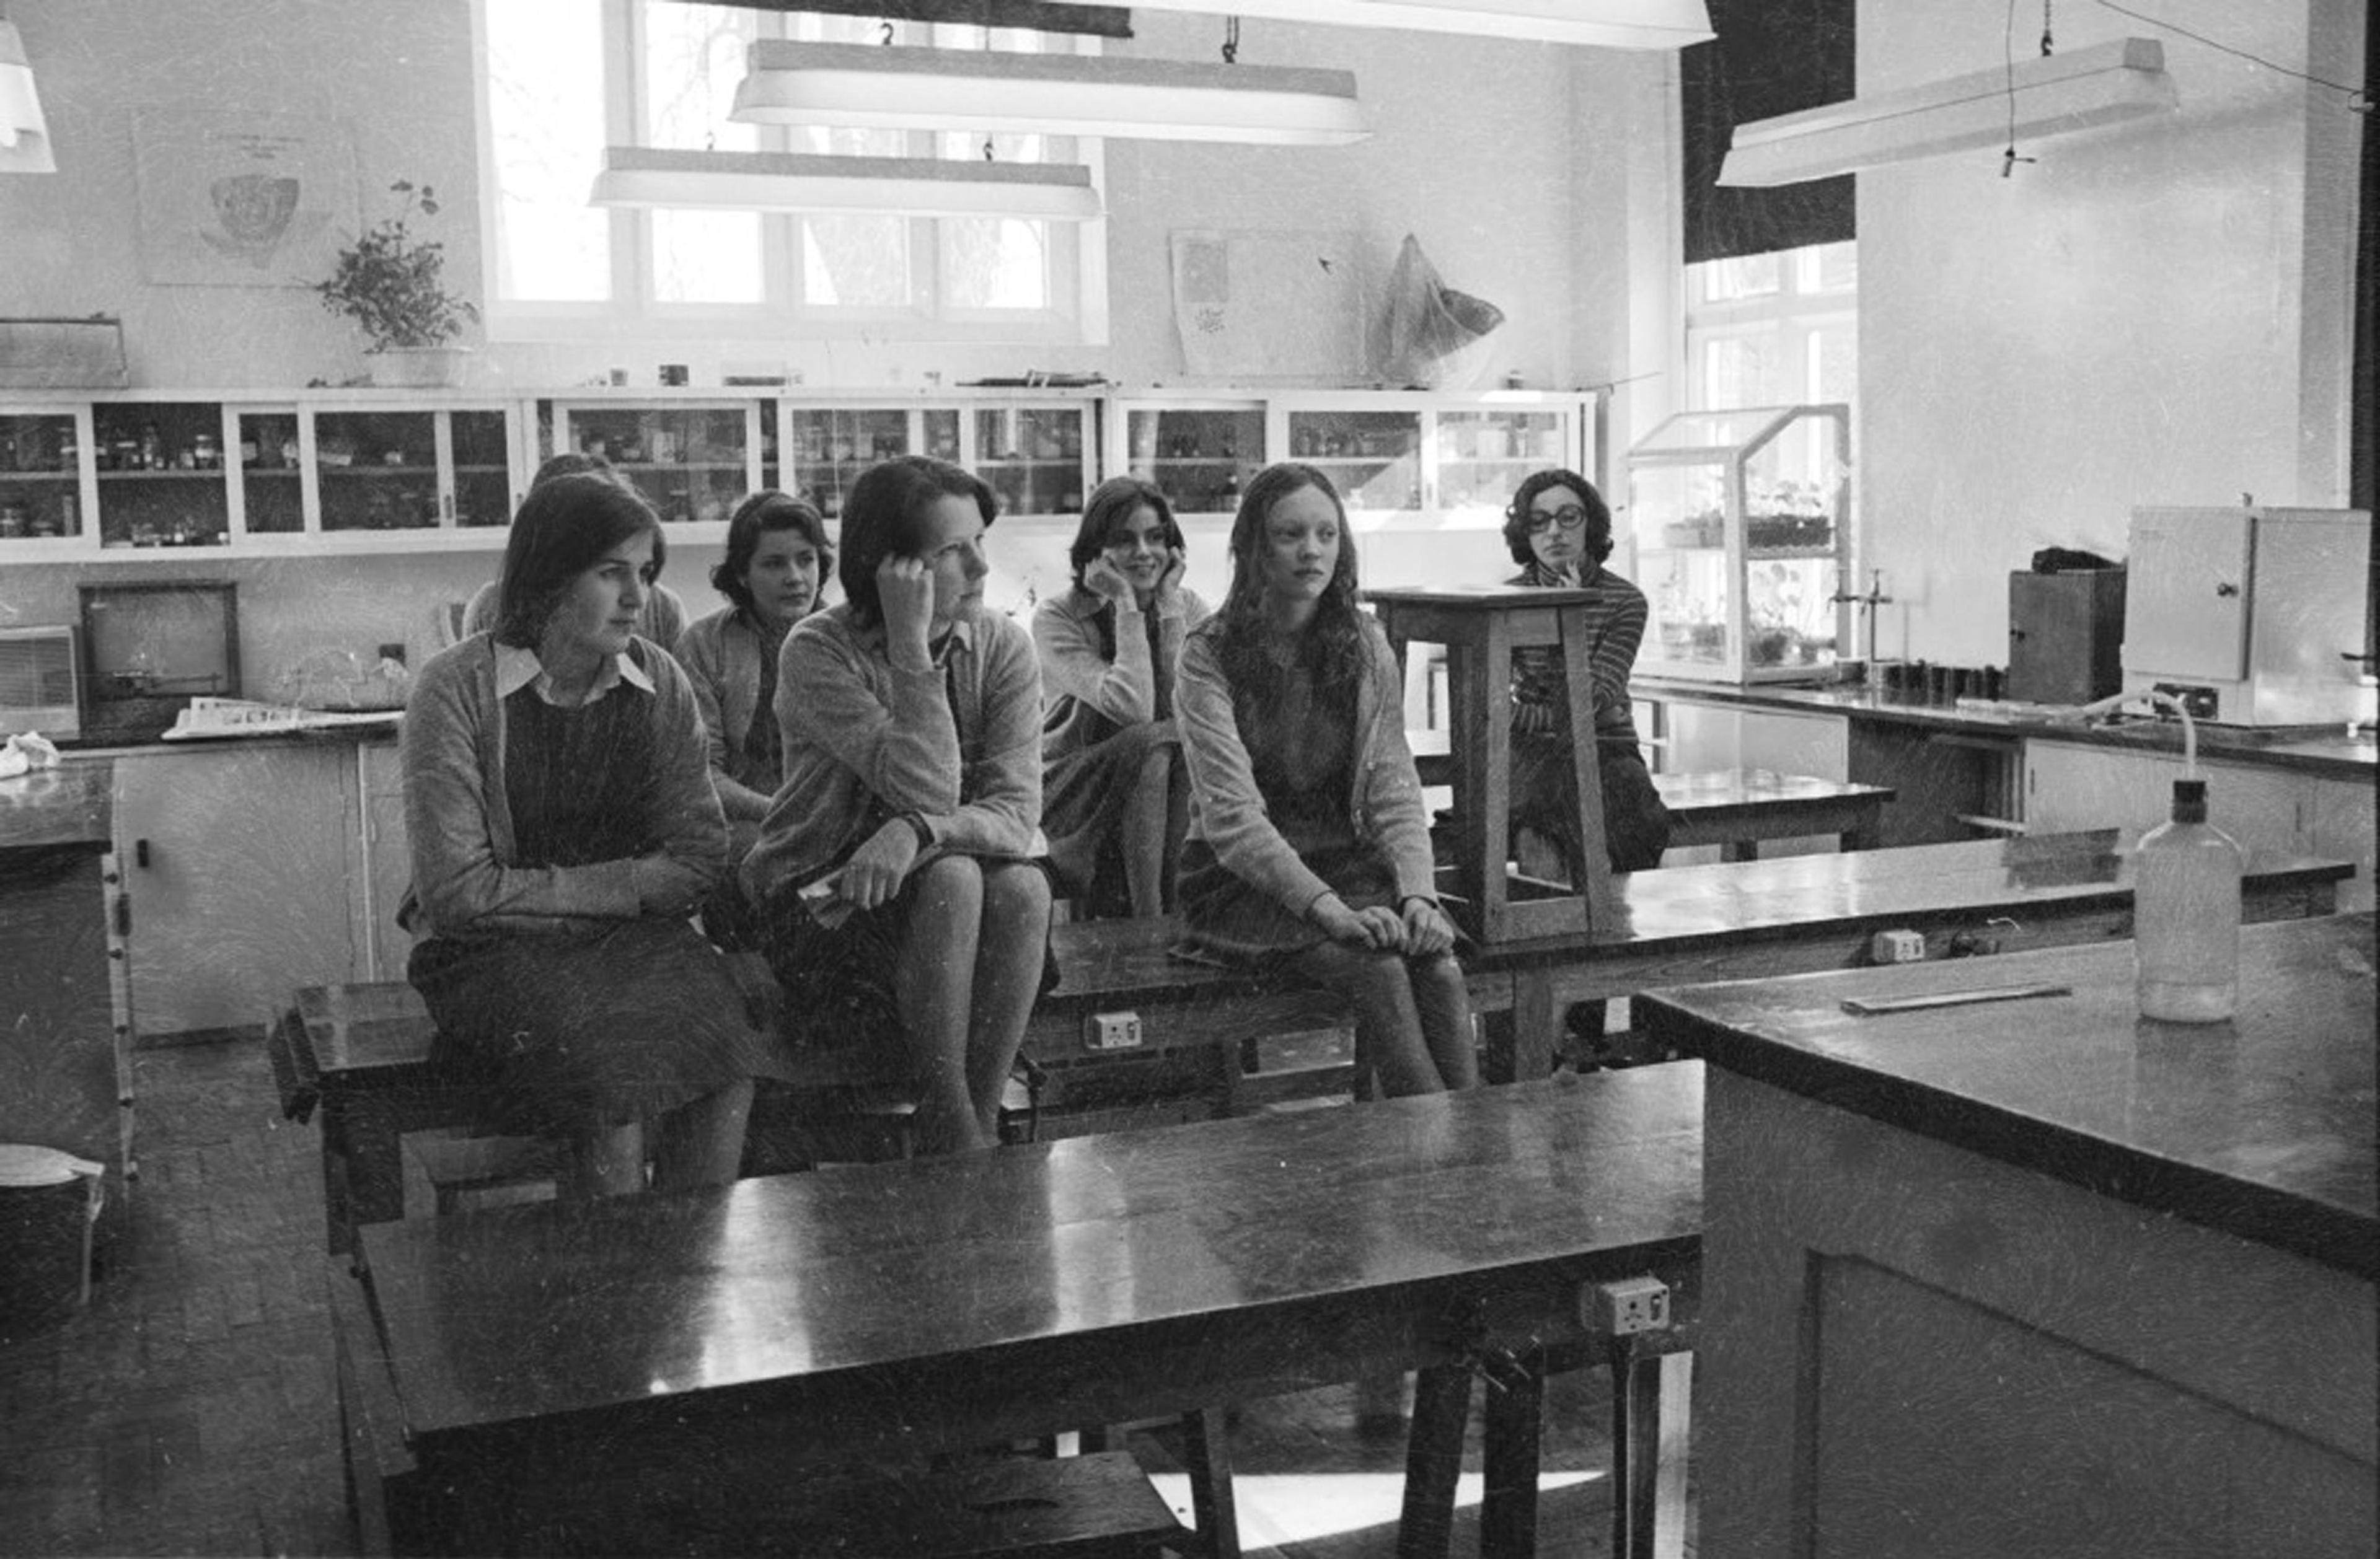 Darcy Lange, Studies of Teaching in Four Oxfordshire Schools, 1977, black-and-white photograph. Courtesy of the artist's estate